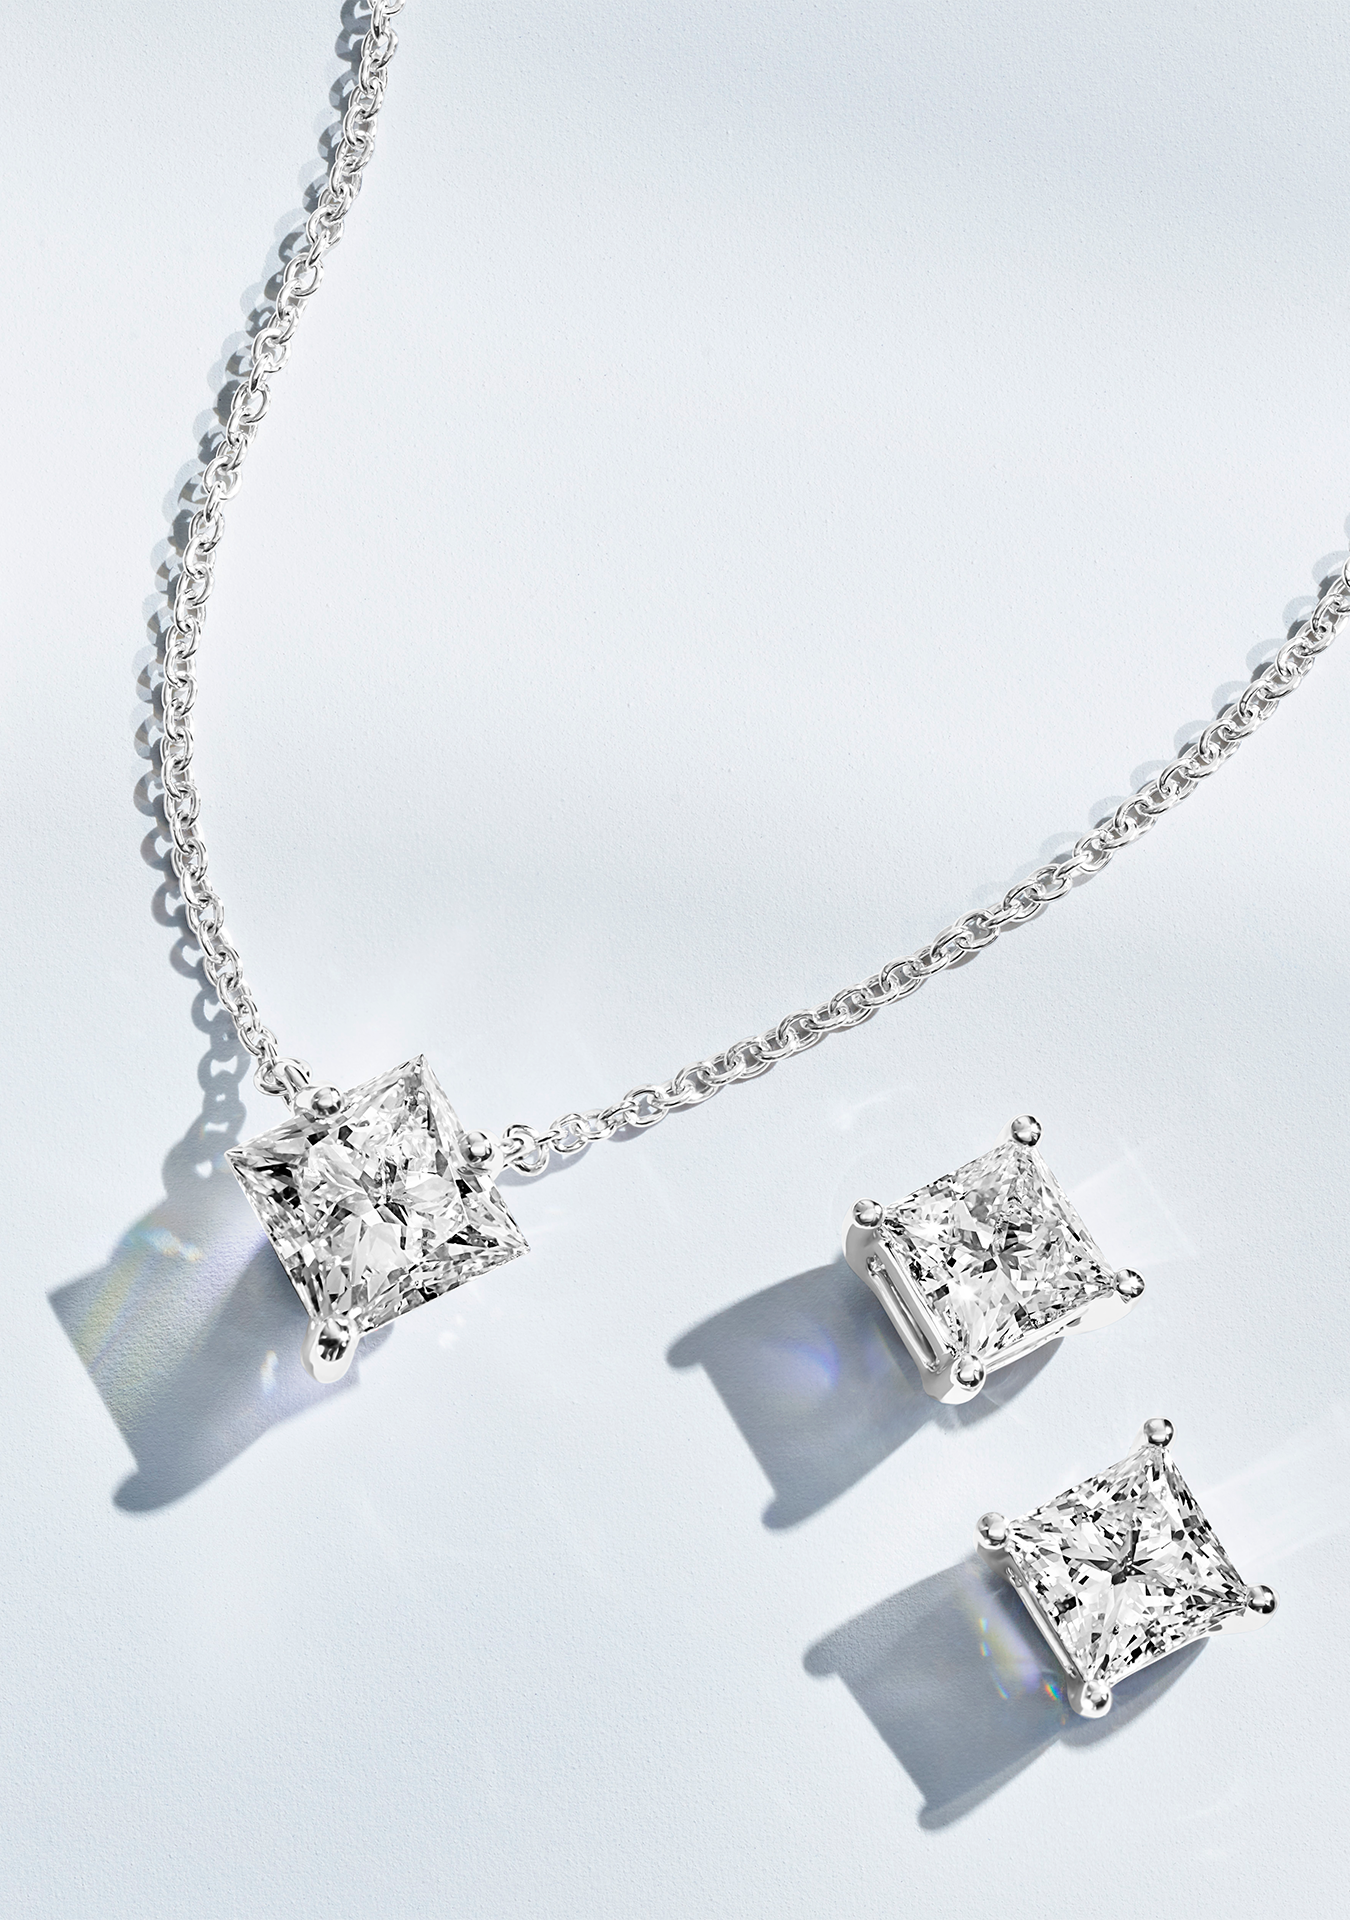 Jewelry set of white princess cut lab-grown diamond earrings and necklace